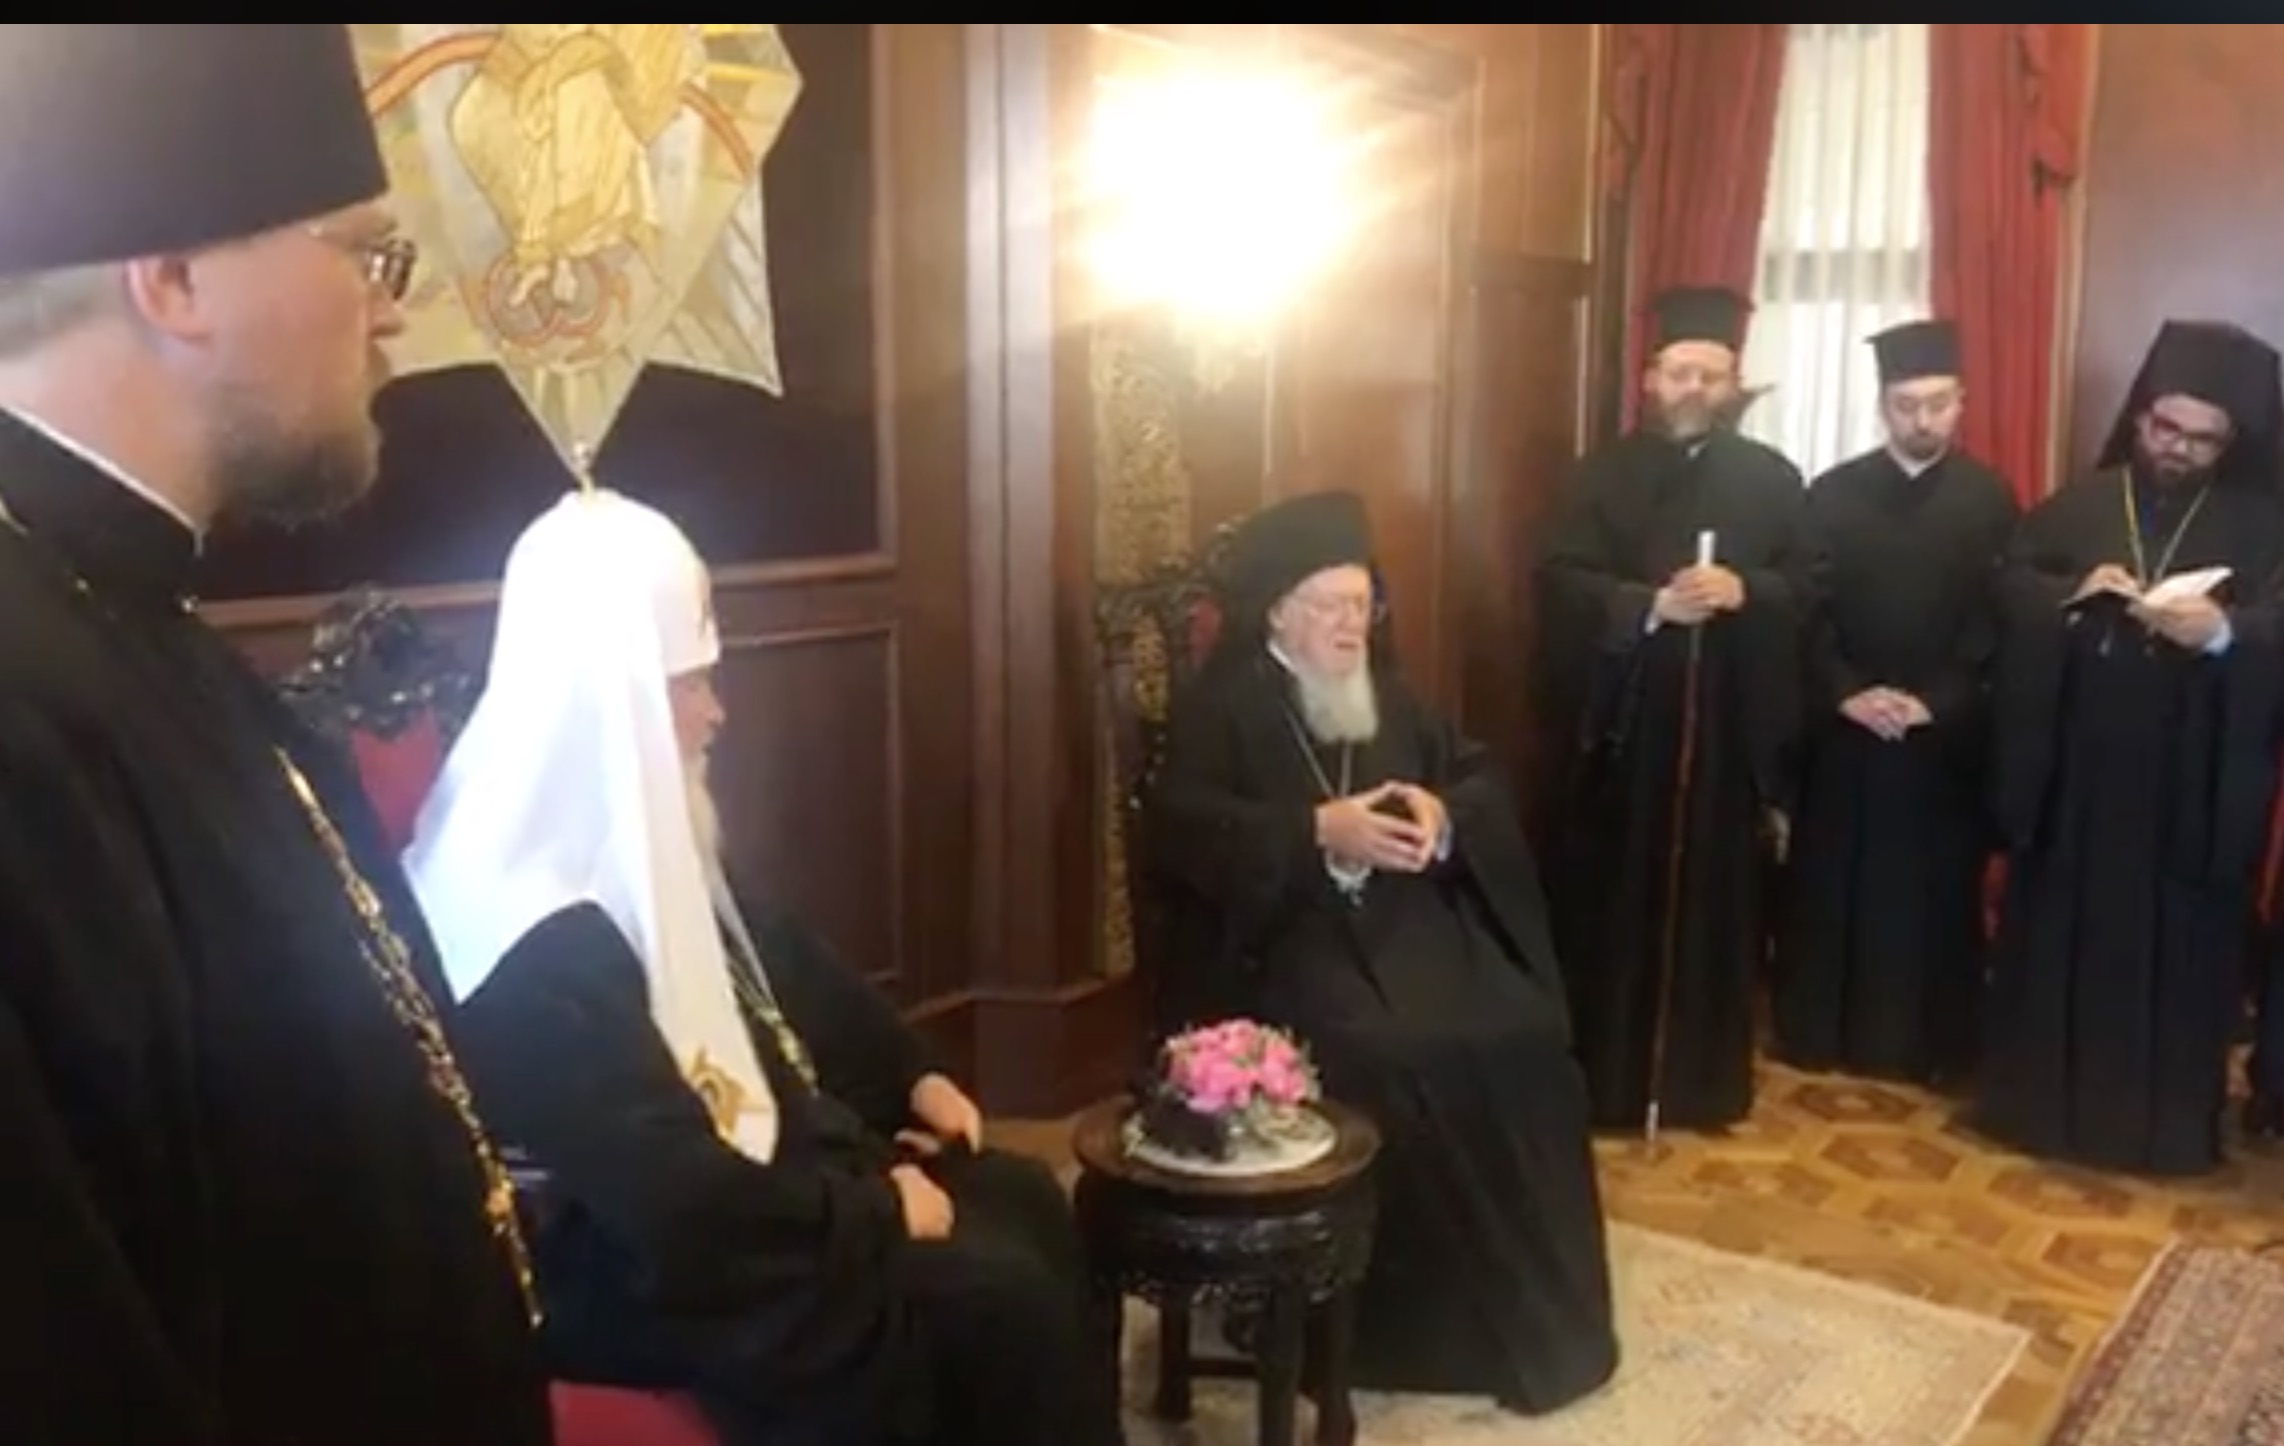 Video of the meeting between the two patriarchs